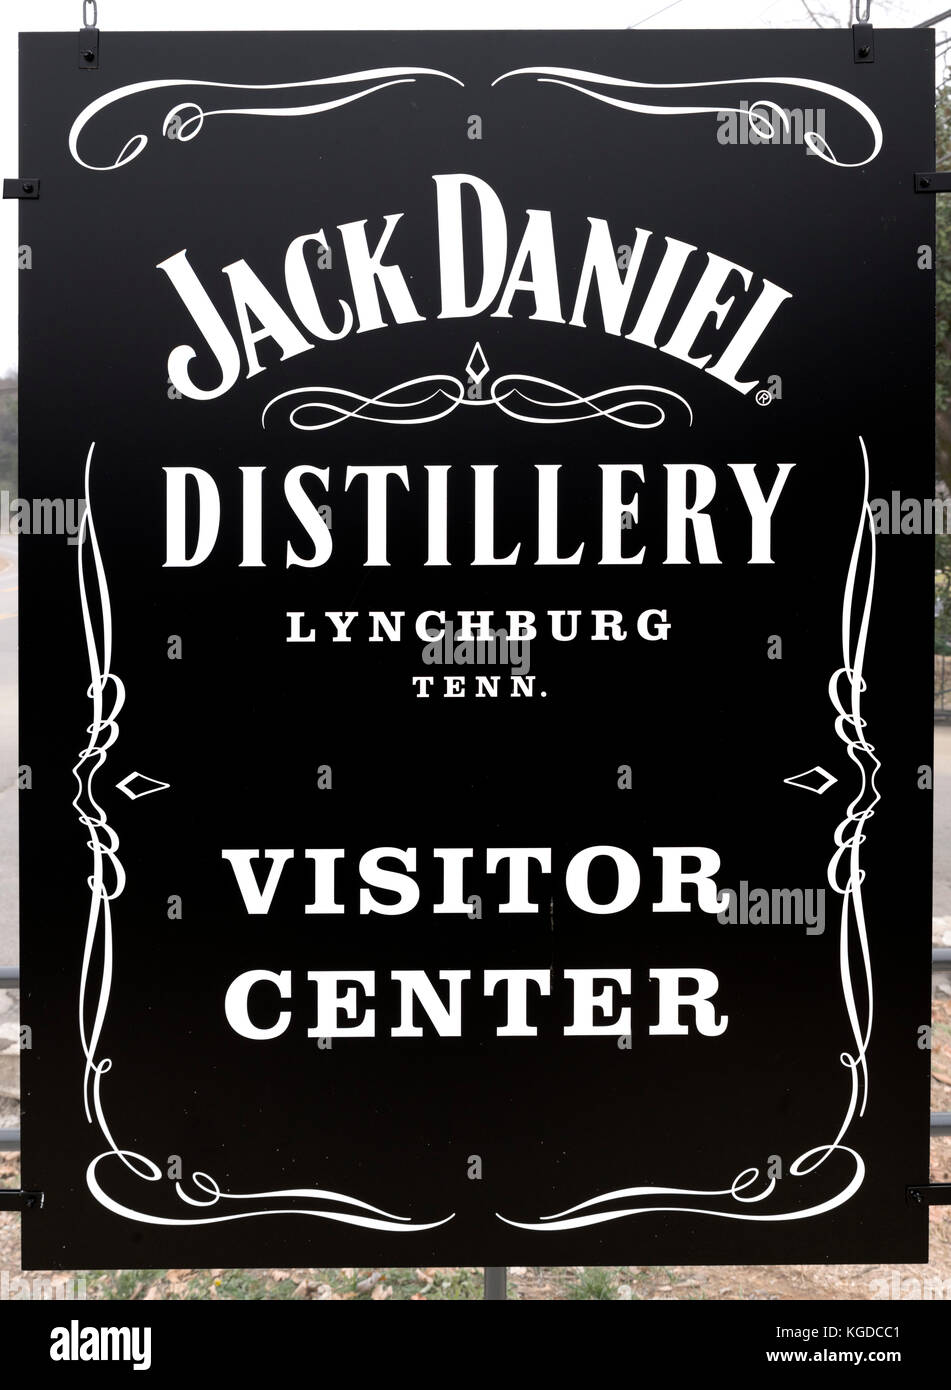 Sign for the Visitor Center at the Jack Daniels Distillery in Lynchburg, Tennessee, USA Stock Photo